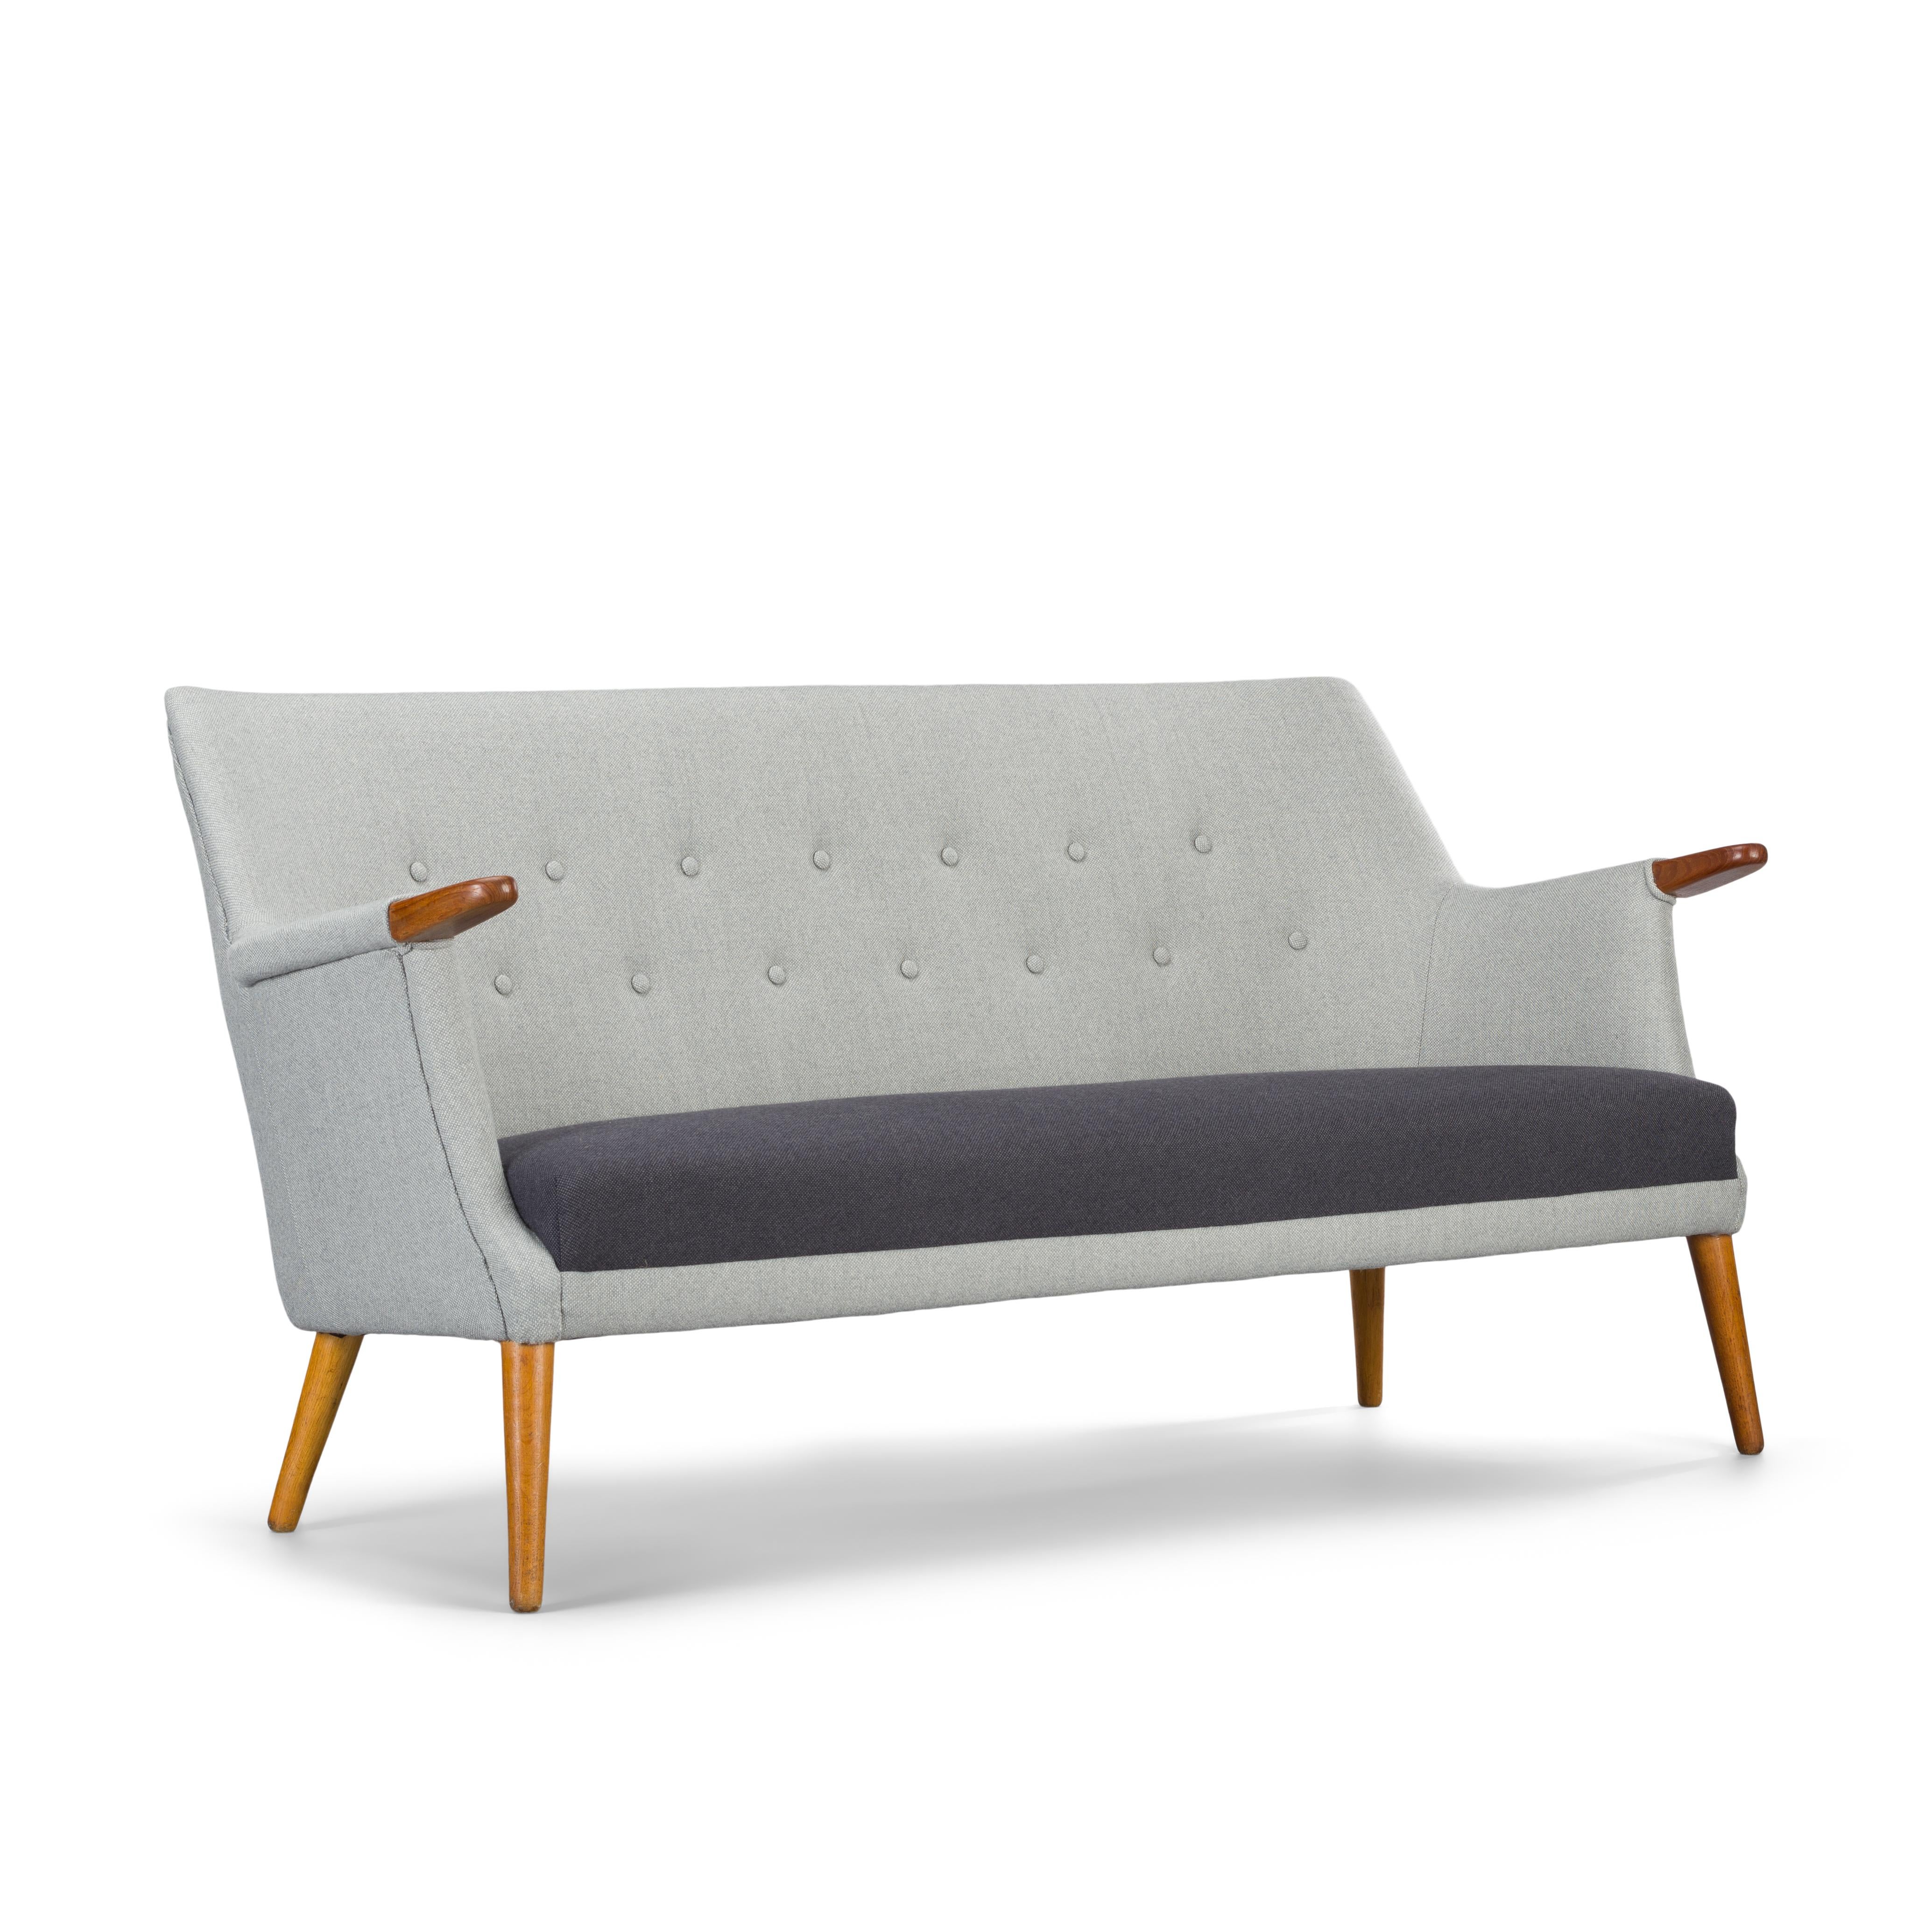 Edgy Johannes Andersen for CFC Silkeborg sofa in stunning new upholstery. Reupholstered in Ploegwool, a 100% pure wool with abrasion resistance >90.000 Martindale. In full accordance with the original upholstery as designed by Andersen. This sofa